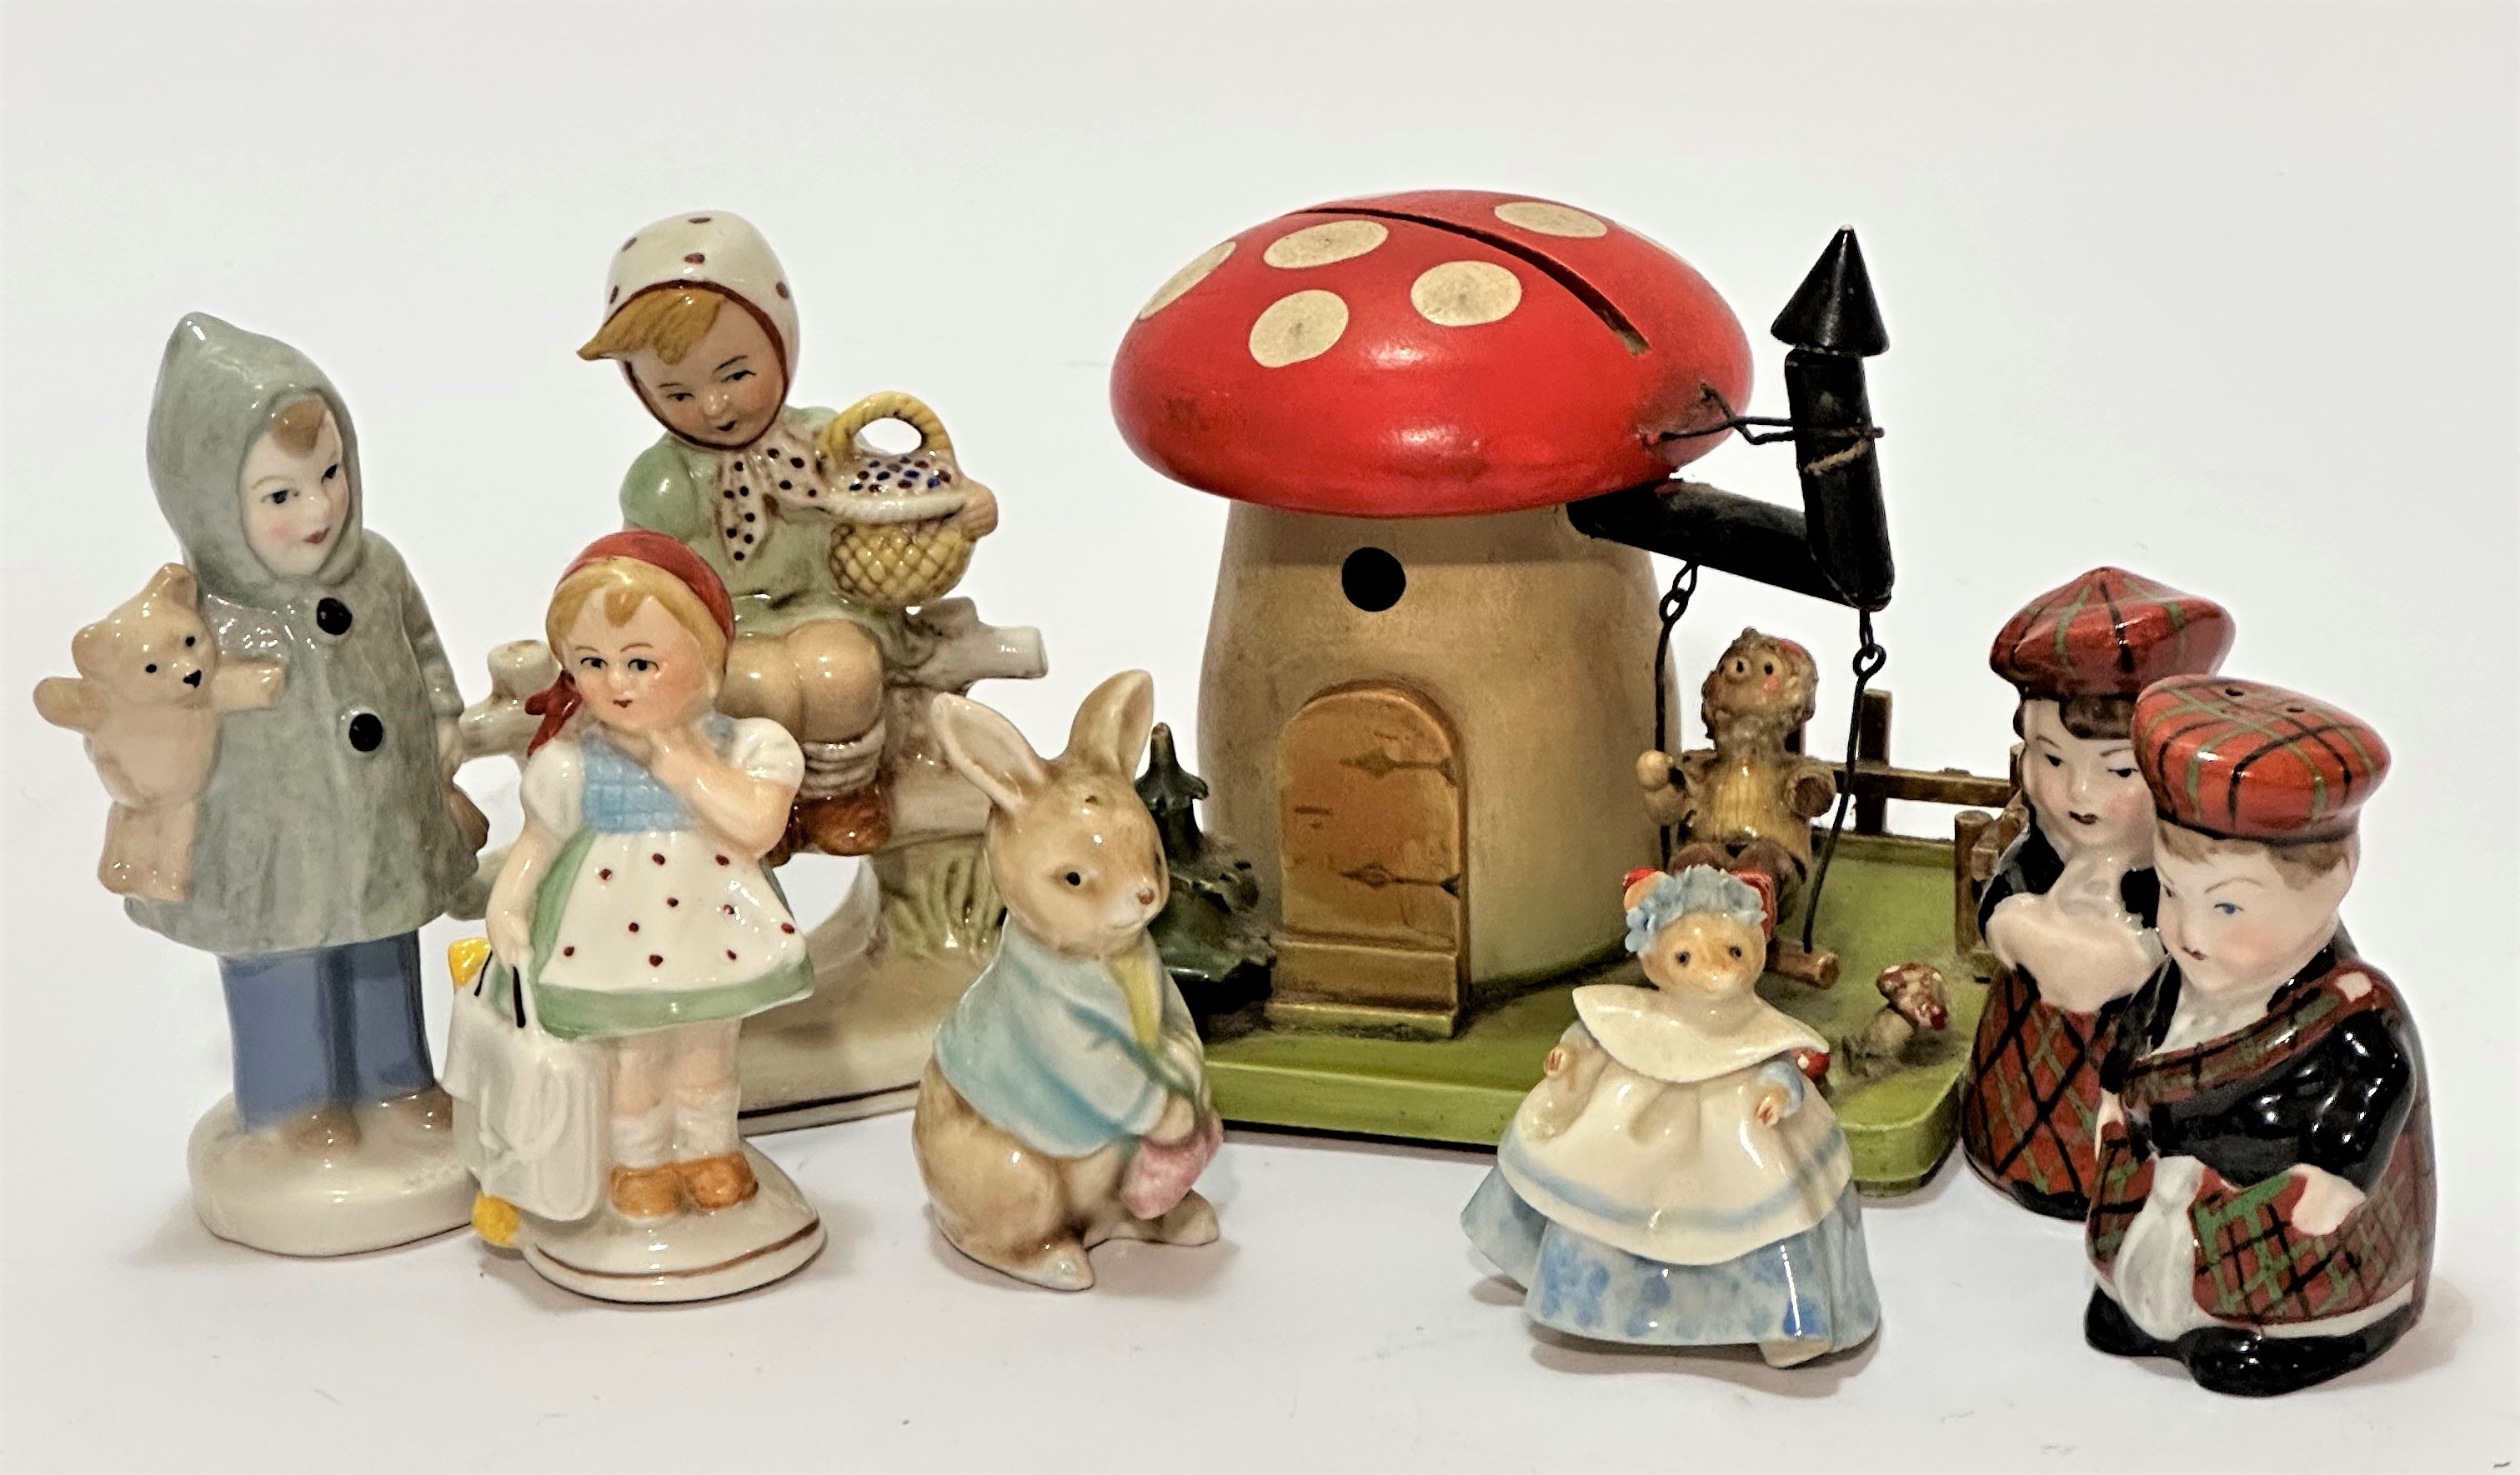 A treen figure on swing under a mushroom moneybox with picket style fence, some losses to paint